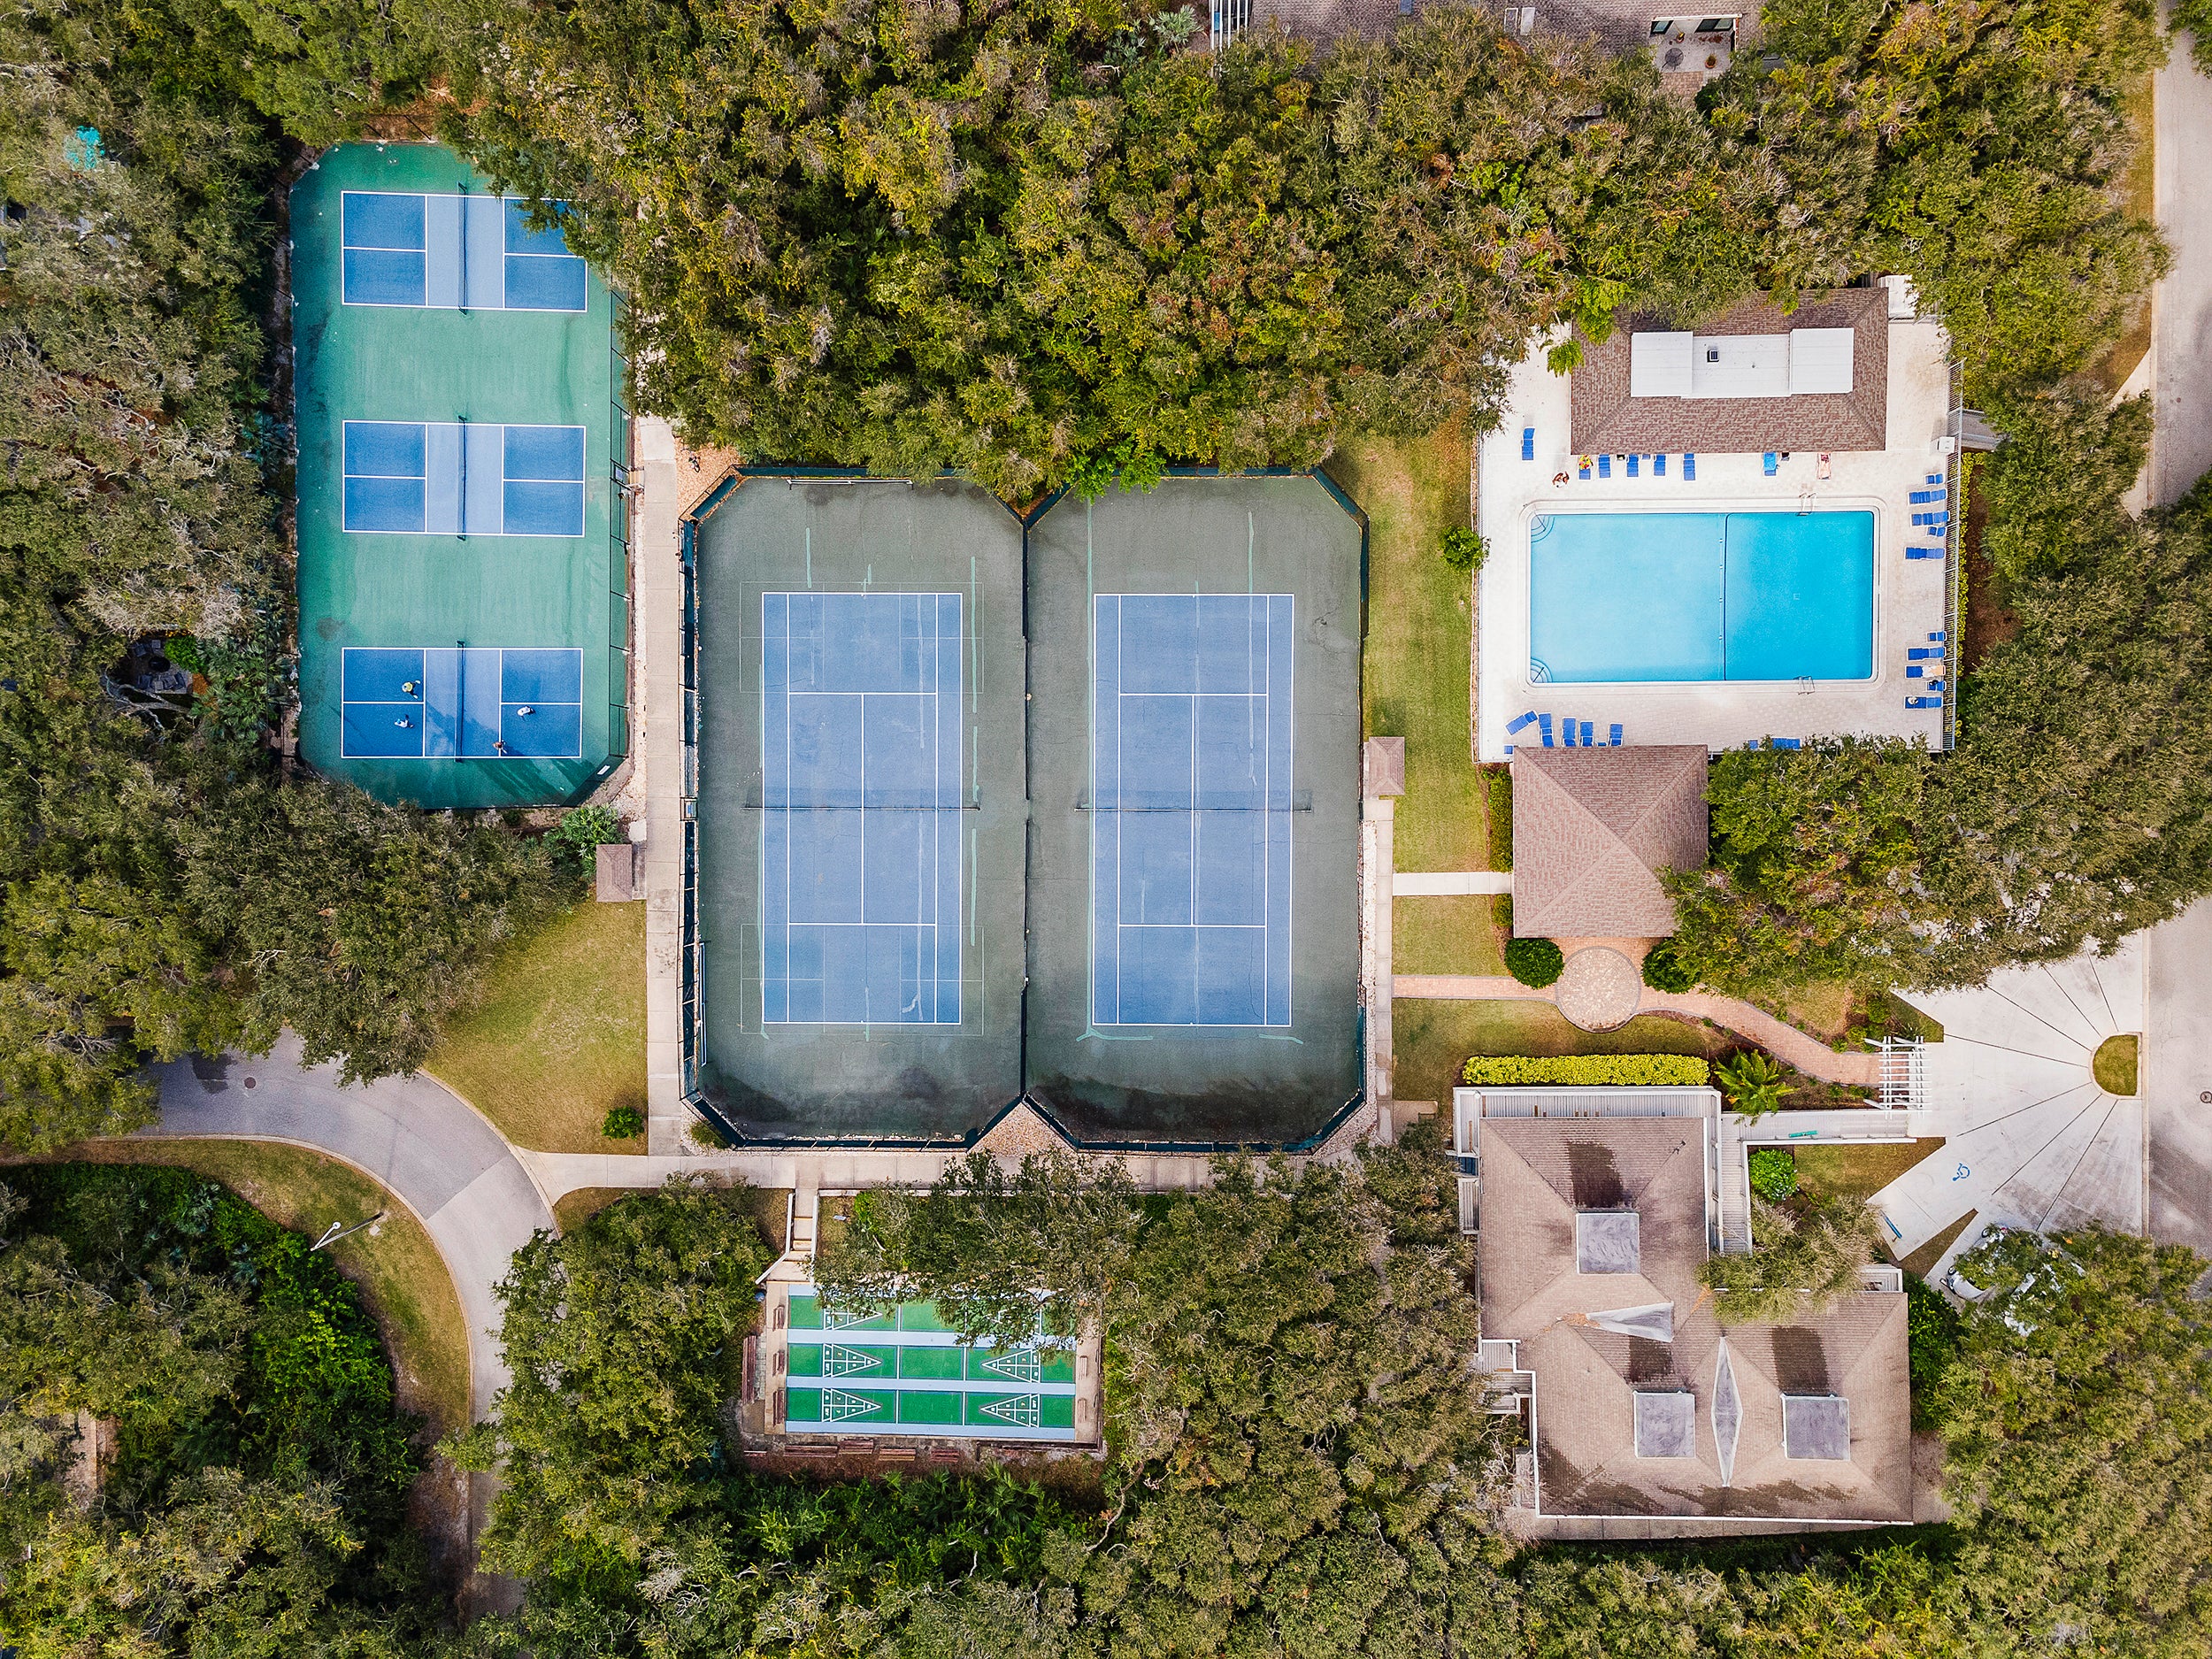 Courts and Pool